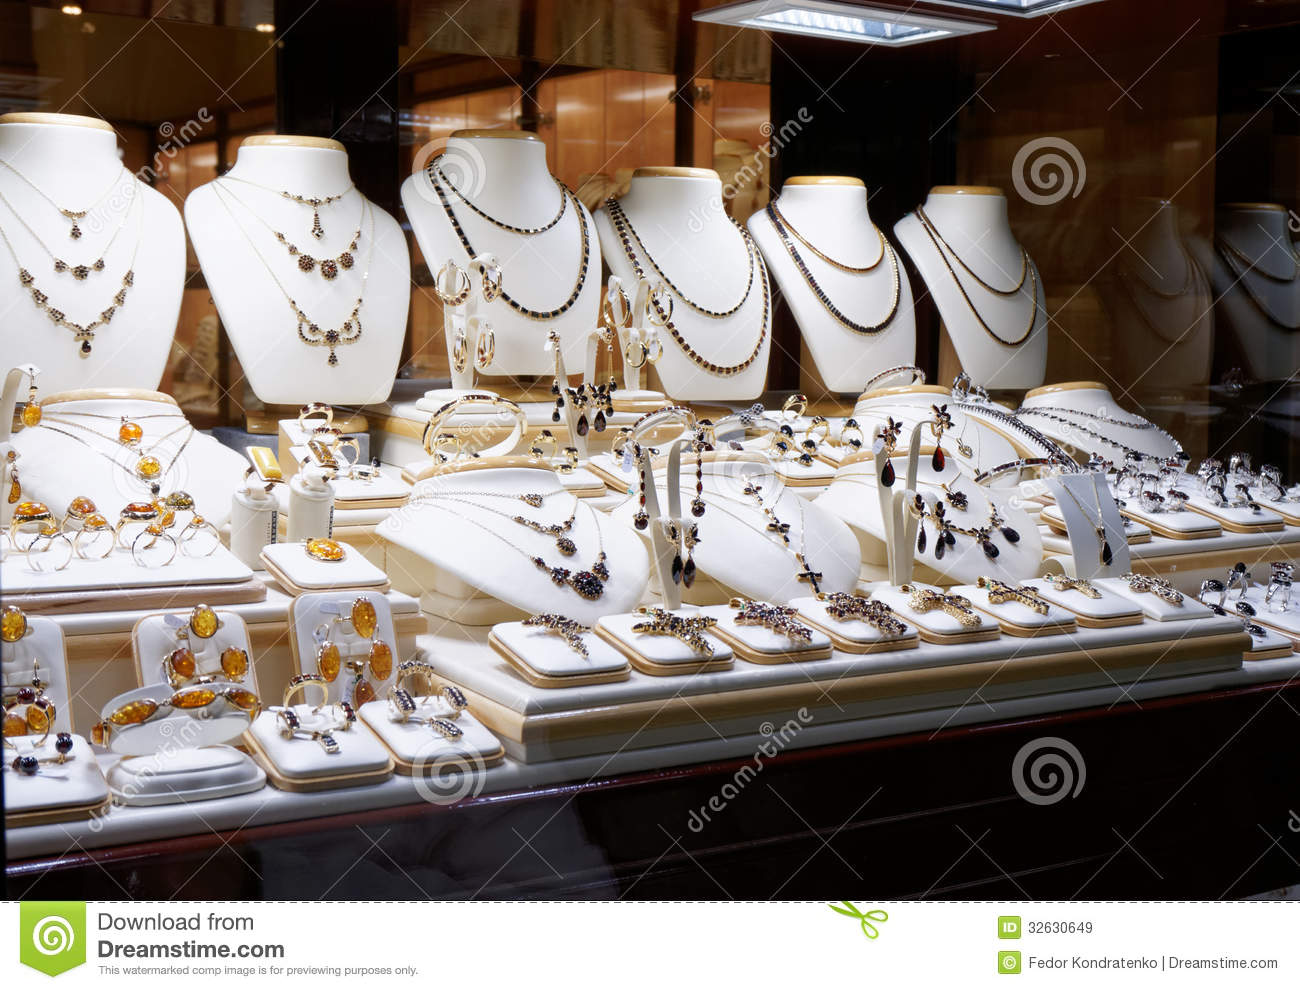 Garnet Jewelry Shop Royalty Free Stock Images   Image  32630649